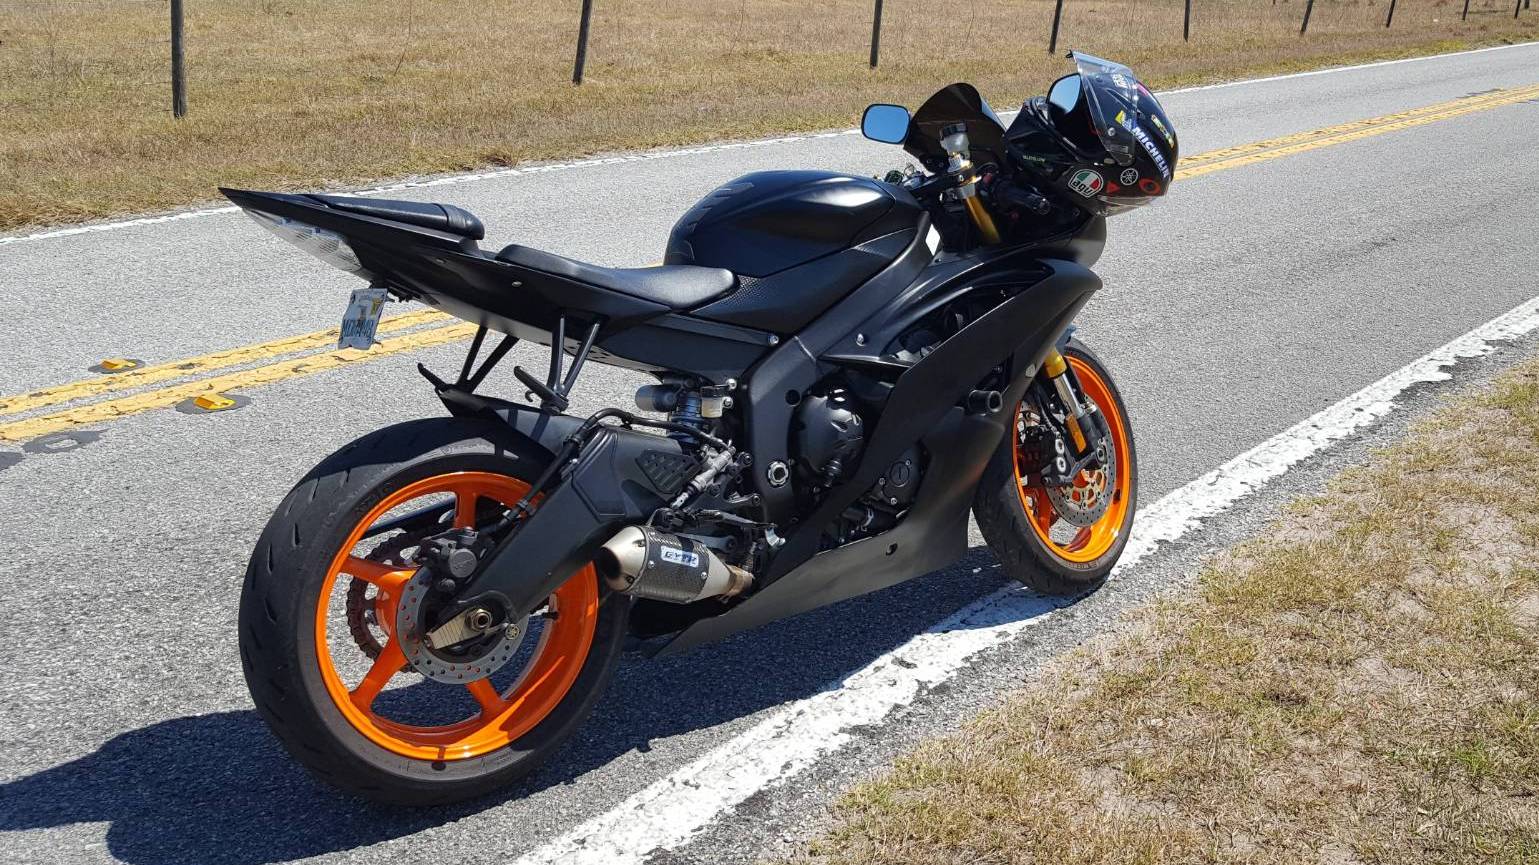 YAMAHA YZF-R6 for rent near St. Cloud, FL | Riders Share